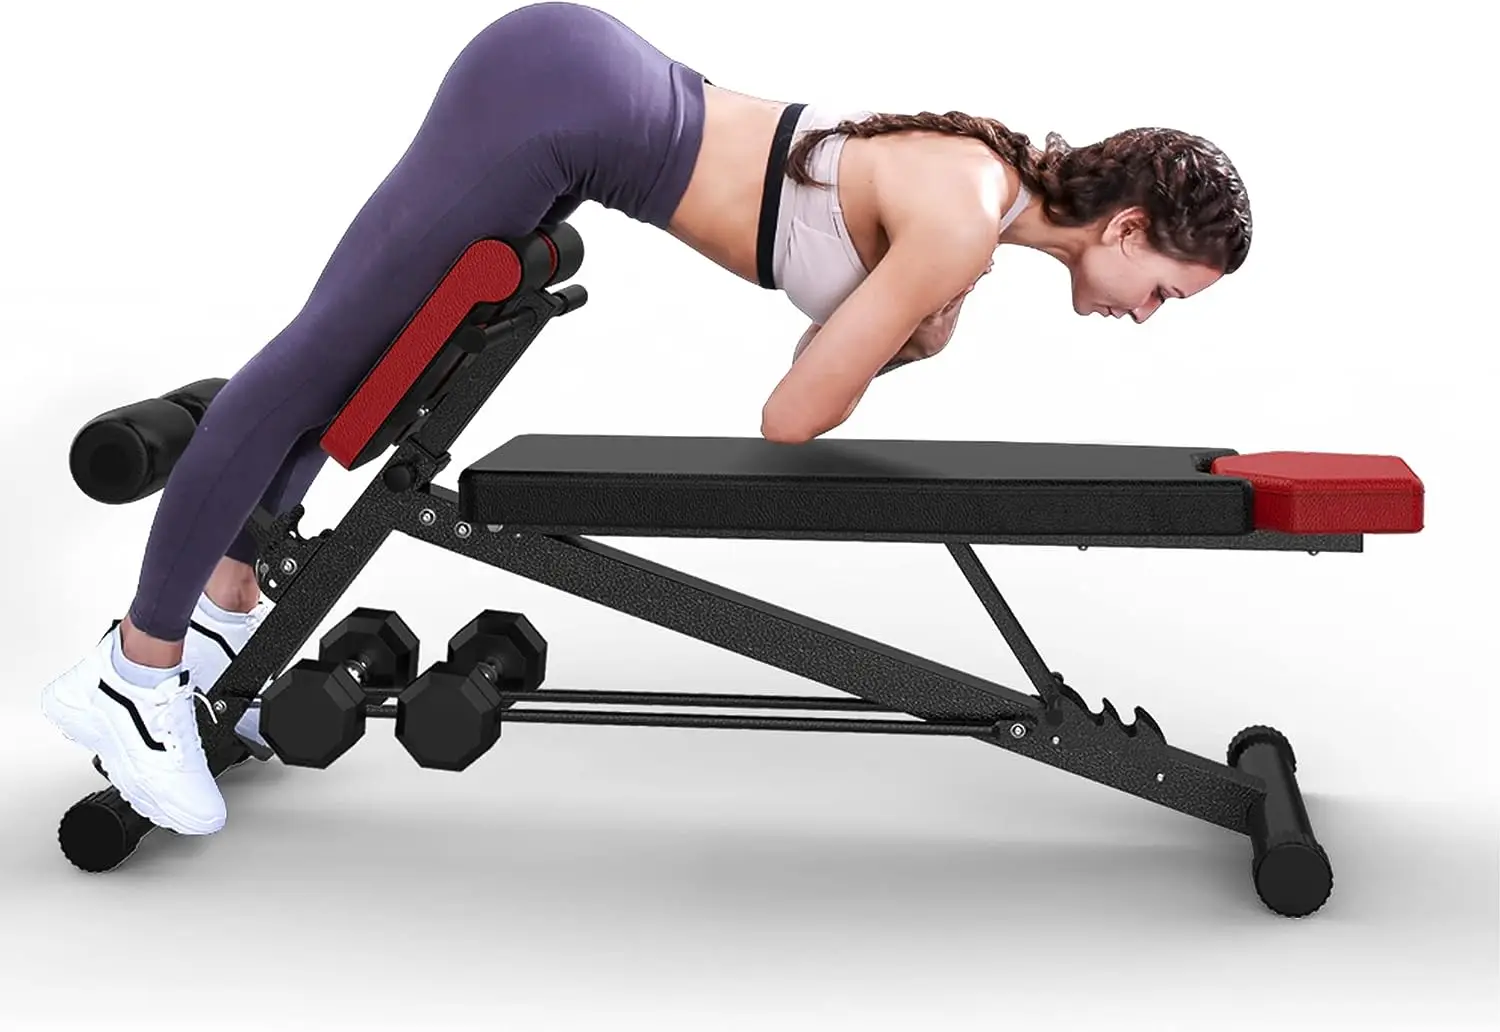 

FORM Multi-Functional Adjustable Weight Bench for Total Body Workout \u2013 Back Extension, Roman Chair, Adjustable Ab Sit up B